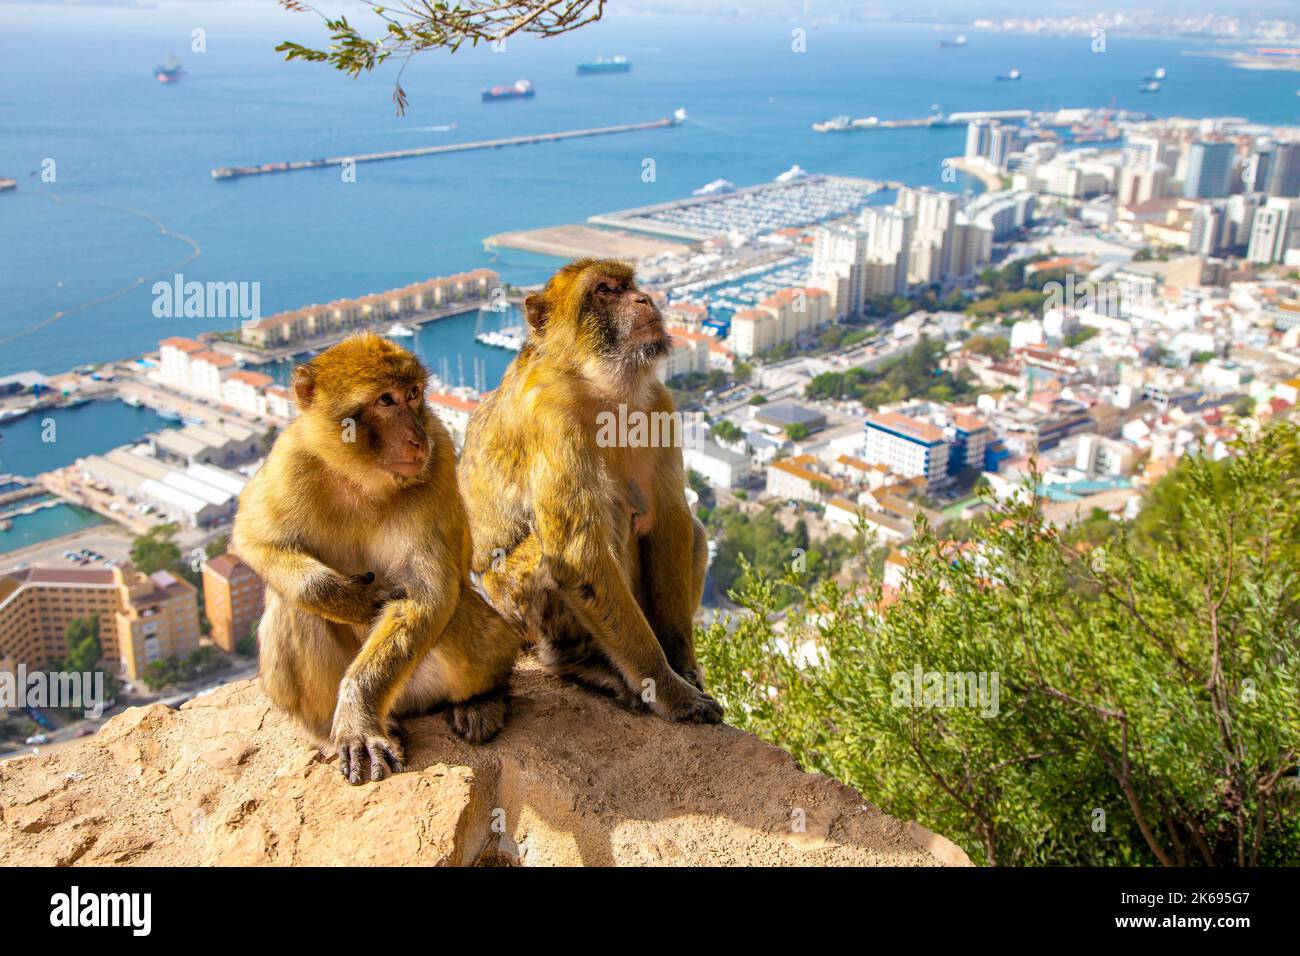 Barbary macaque monkeys at the Apes' Den overlooking the city and port, Upper Rock Nature Reserve, Gibraltar Stock Photo